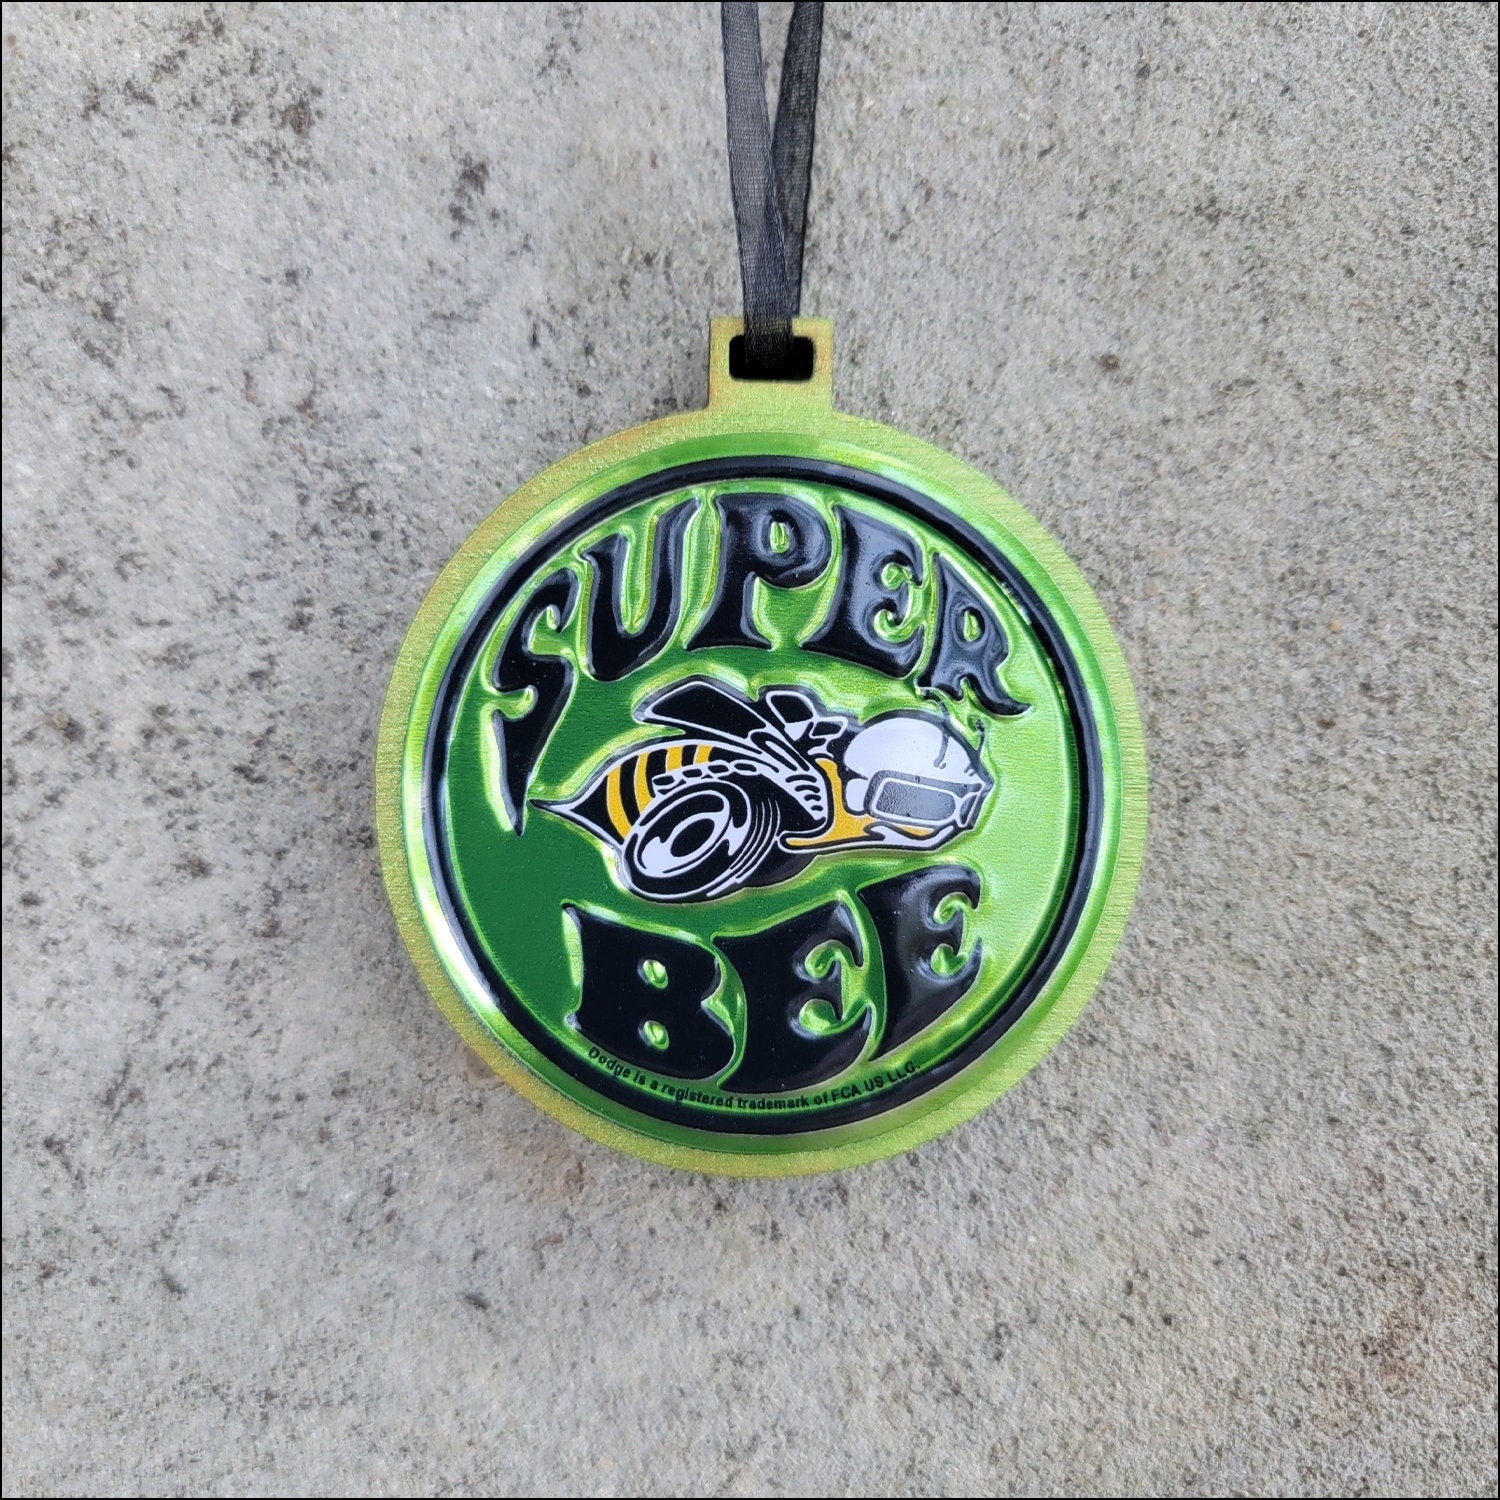 Dodge Super Bee Ornament Christmas Ornaments Genuine Parts Wood And Metal